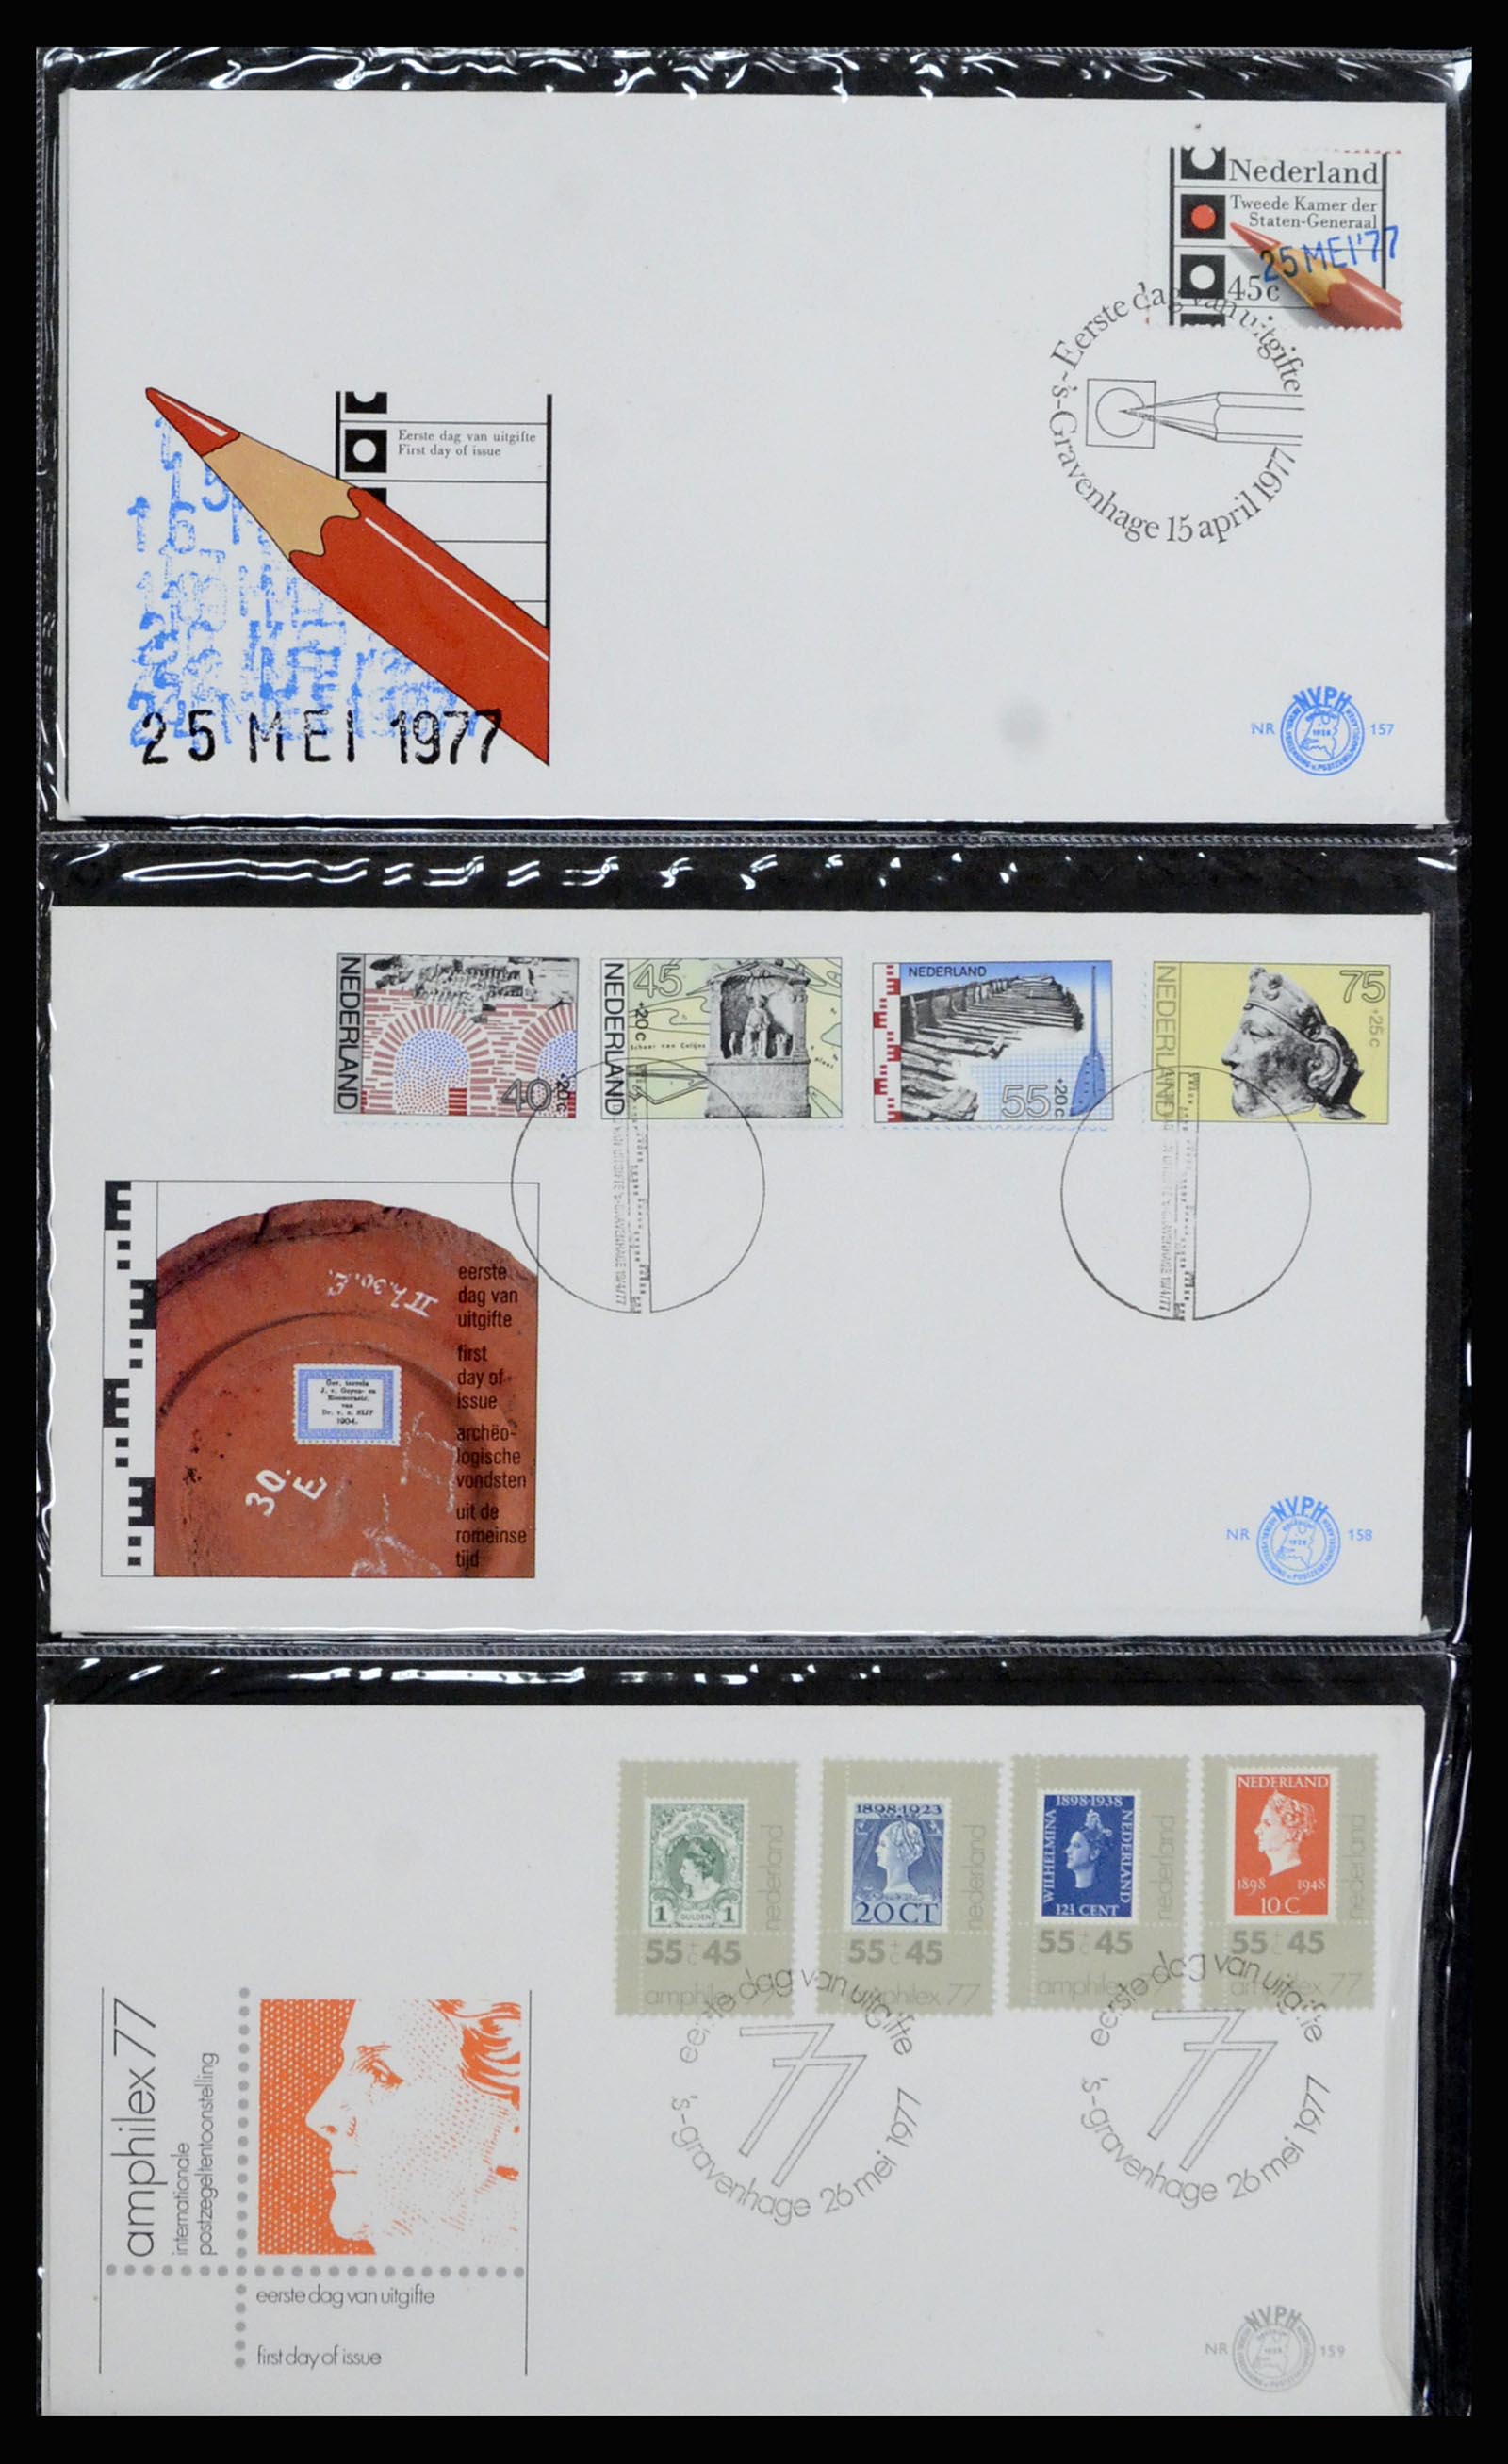 37197 057 - Stamp collection 37197 Netherlands FDC's 1950-2004.